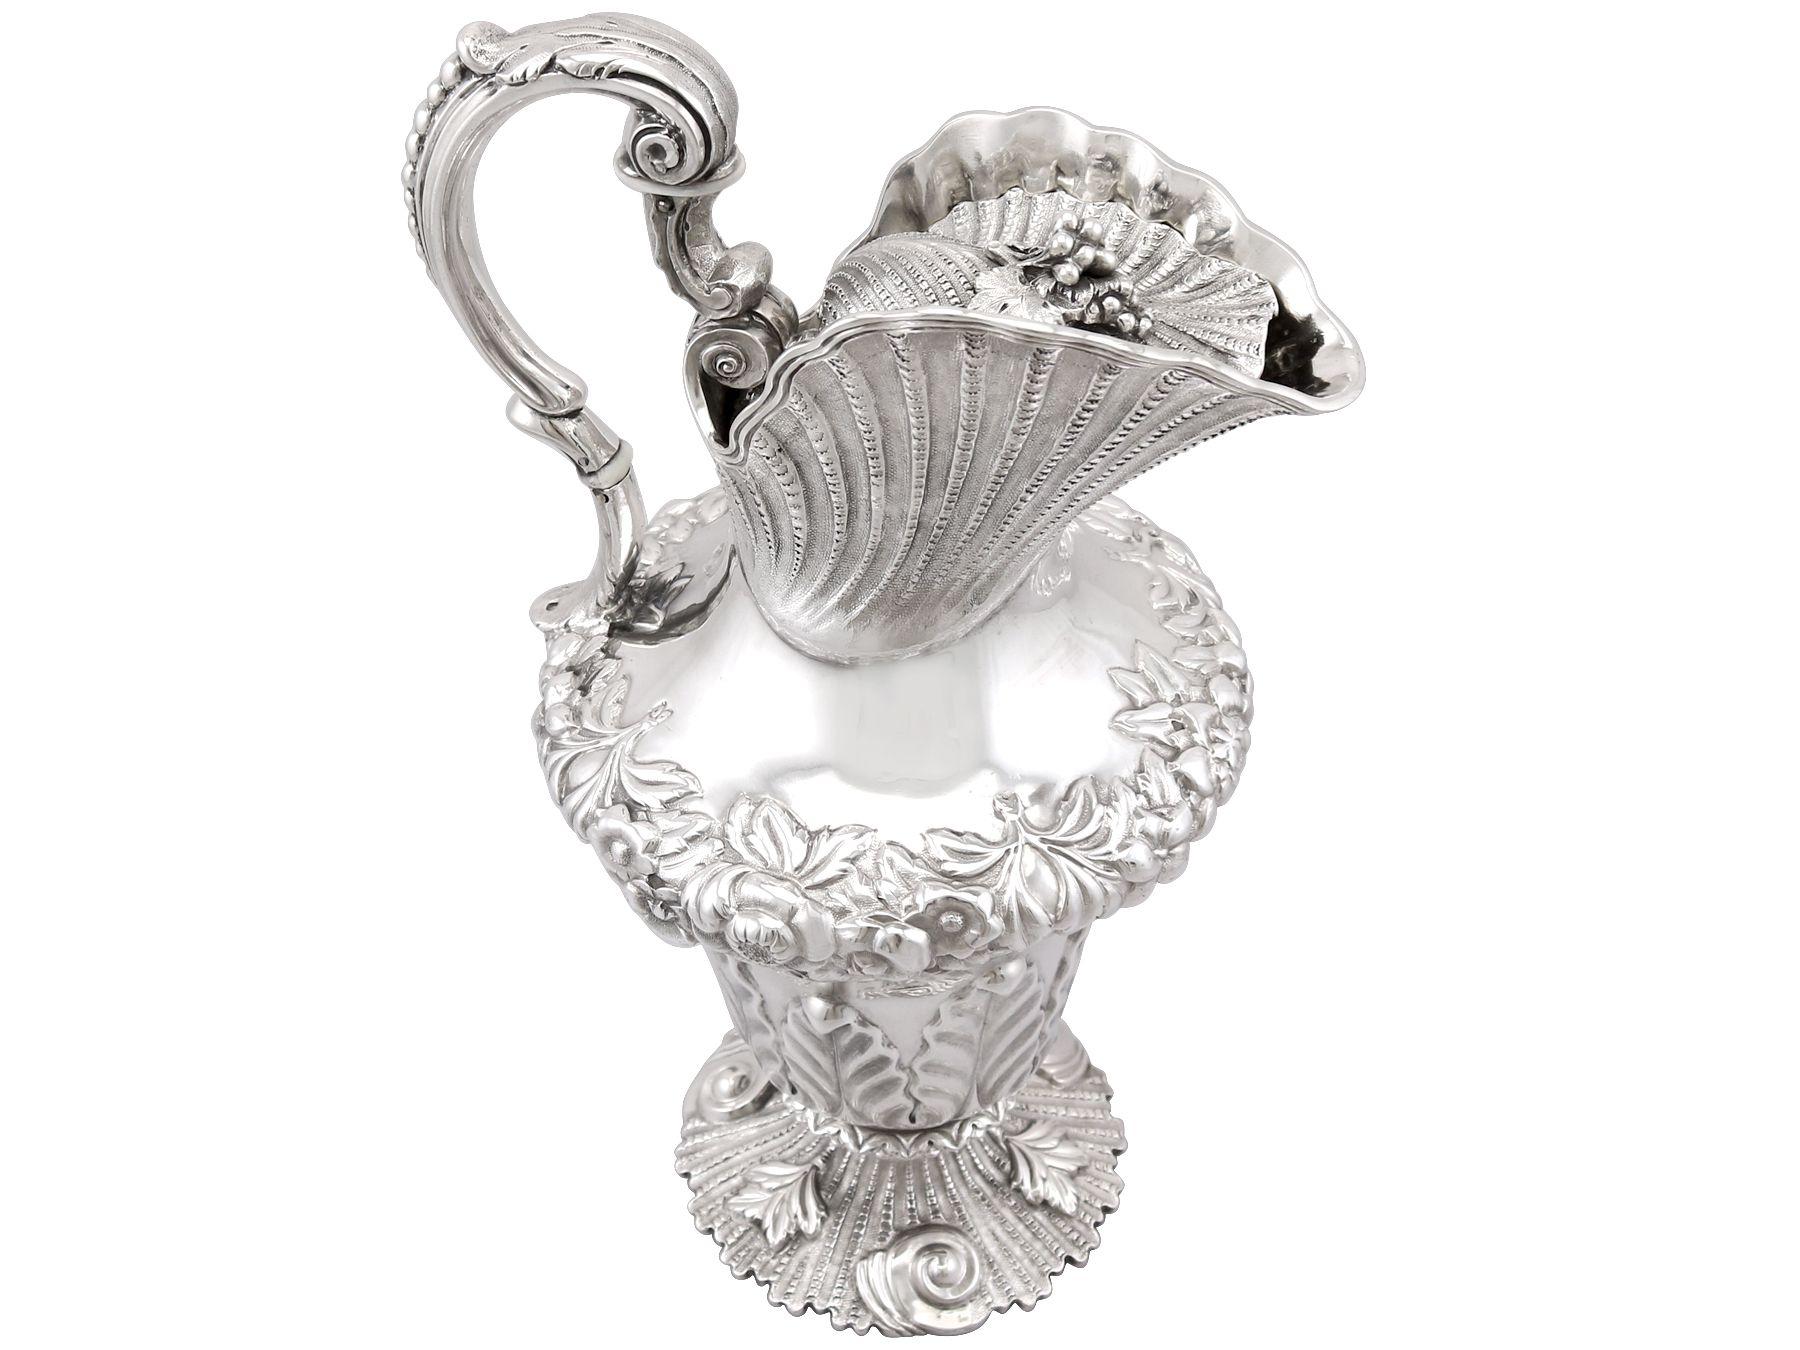 A magnificent, fine and impressive, large antique William IV Irish sterling silver water jug; part of our antique dining silverware collection.

This magnificent and large sterling silver water jug has an inverted baluster, shell shaped form onto